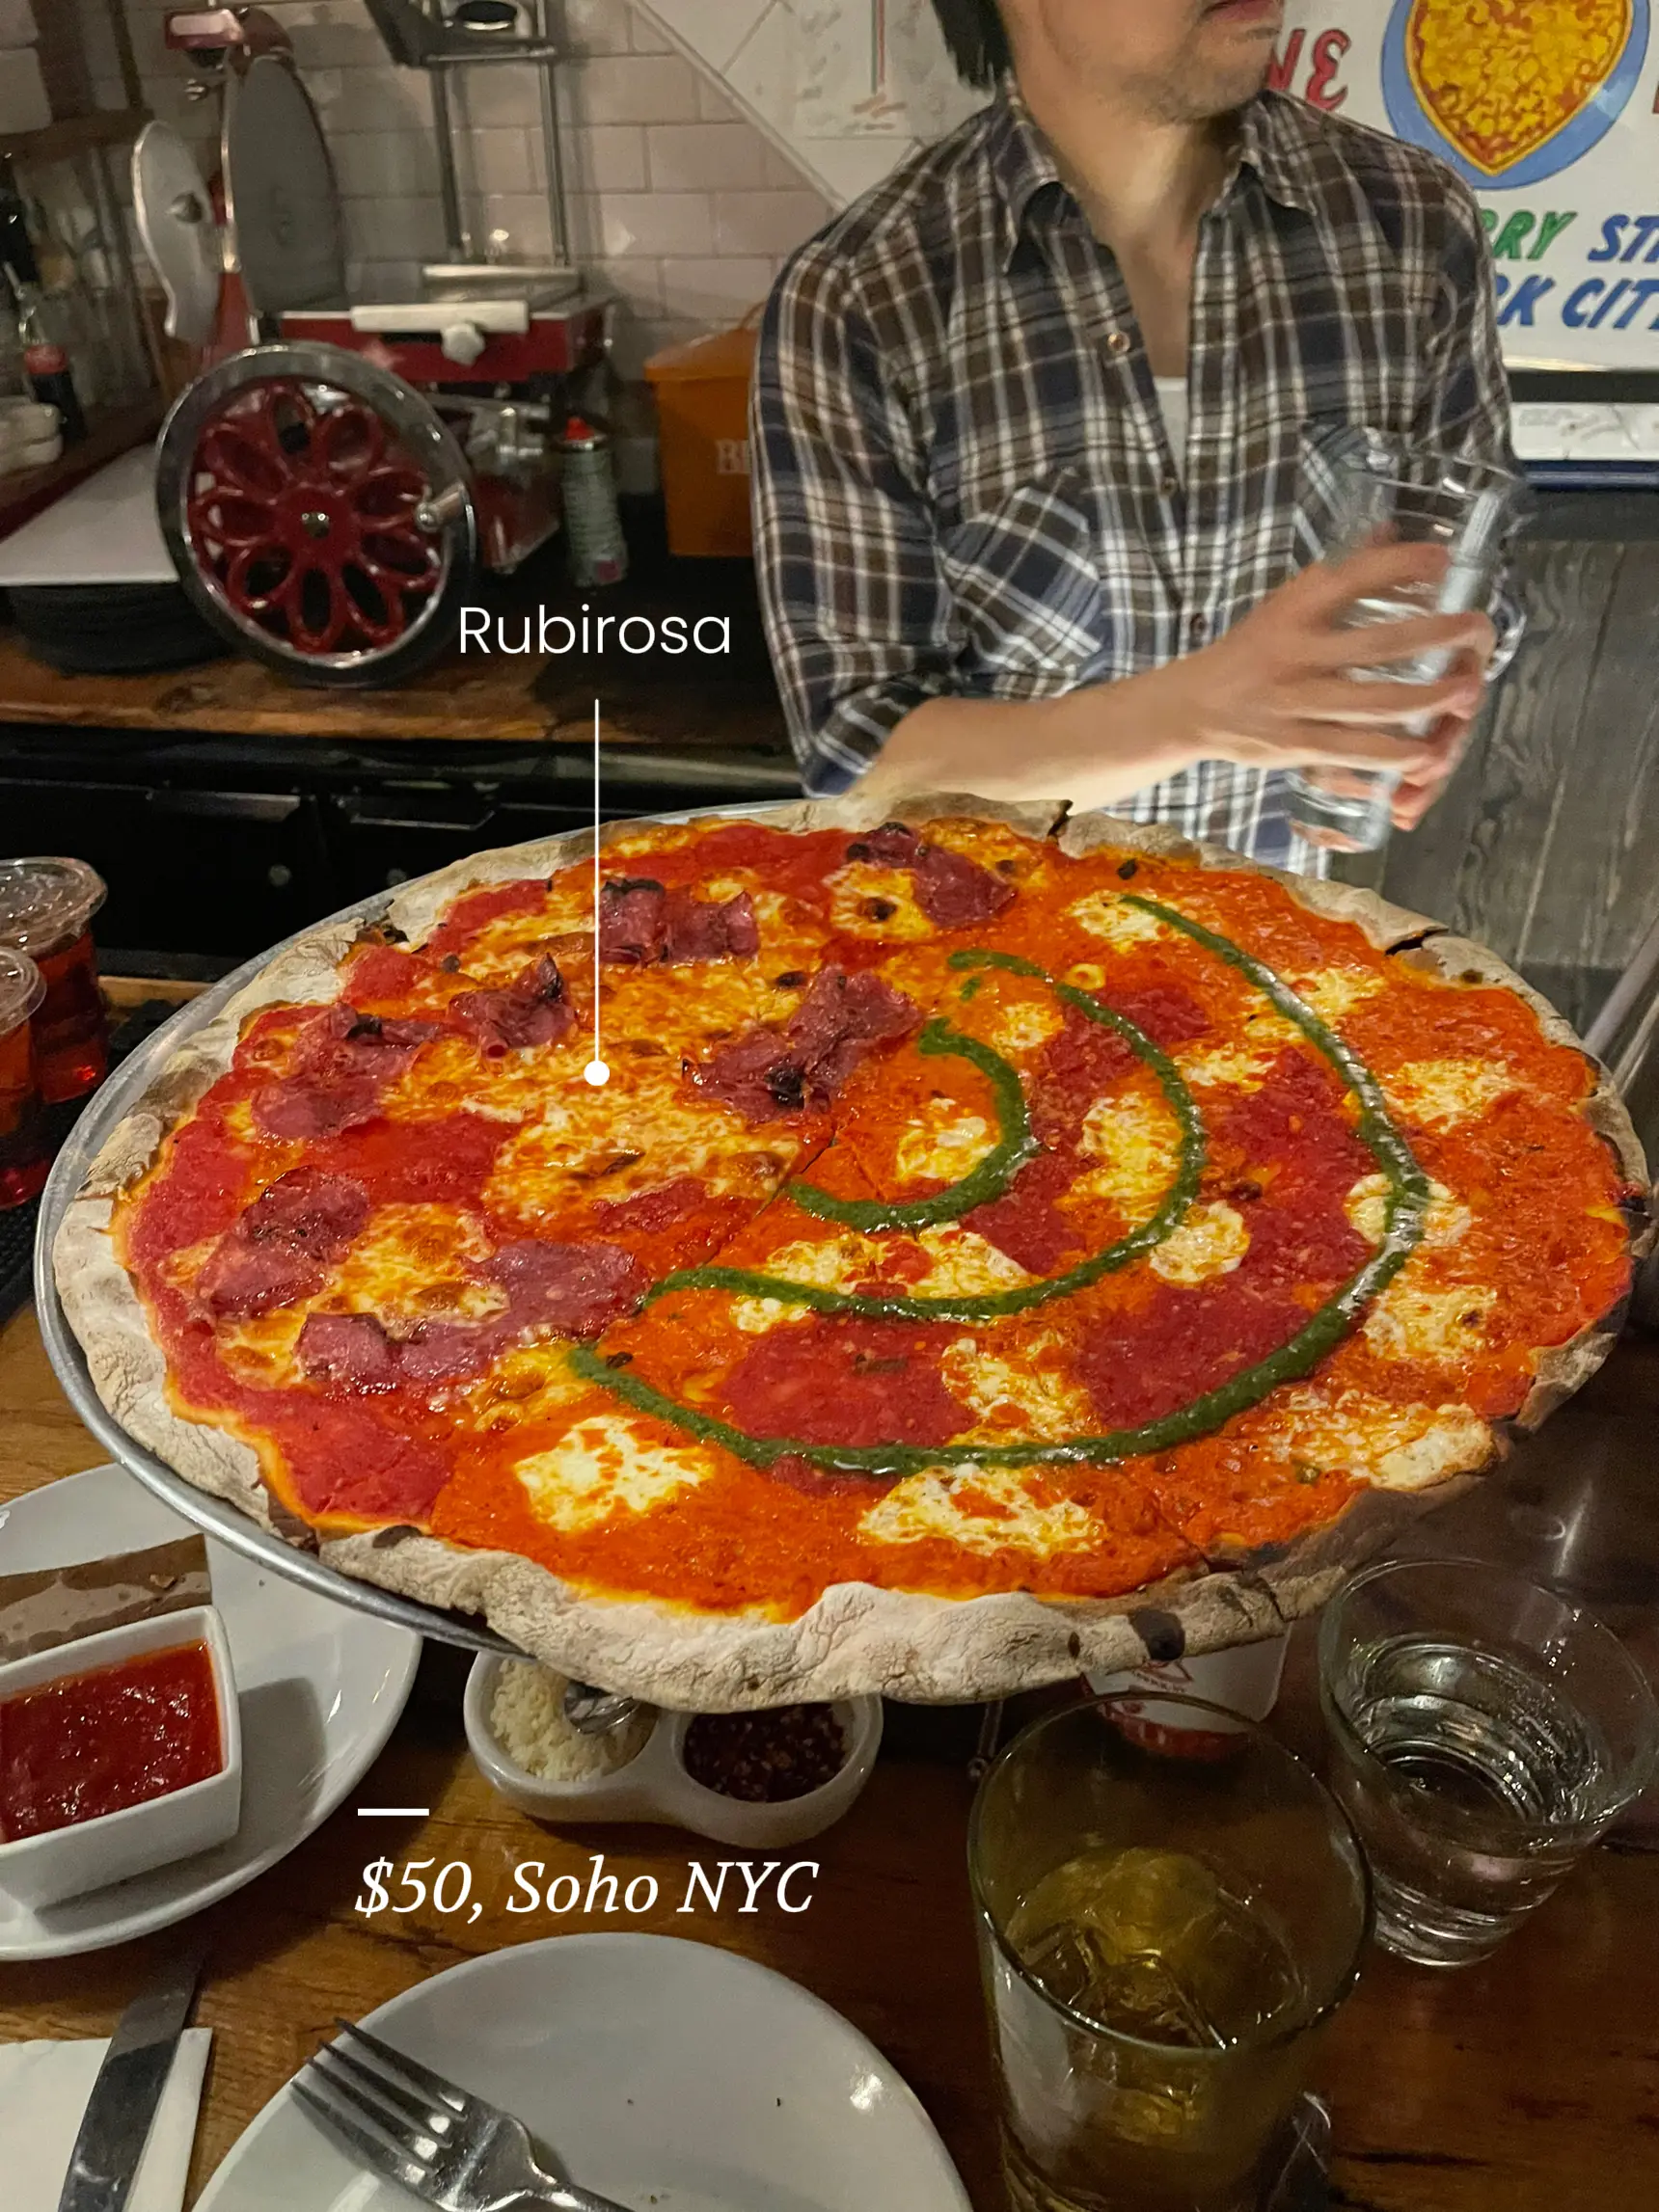  A large pizza with a lot of toppings is sitting on a table. The pizza is covered in cheese and has a price of $50.